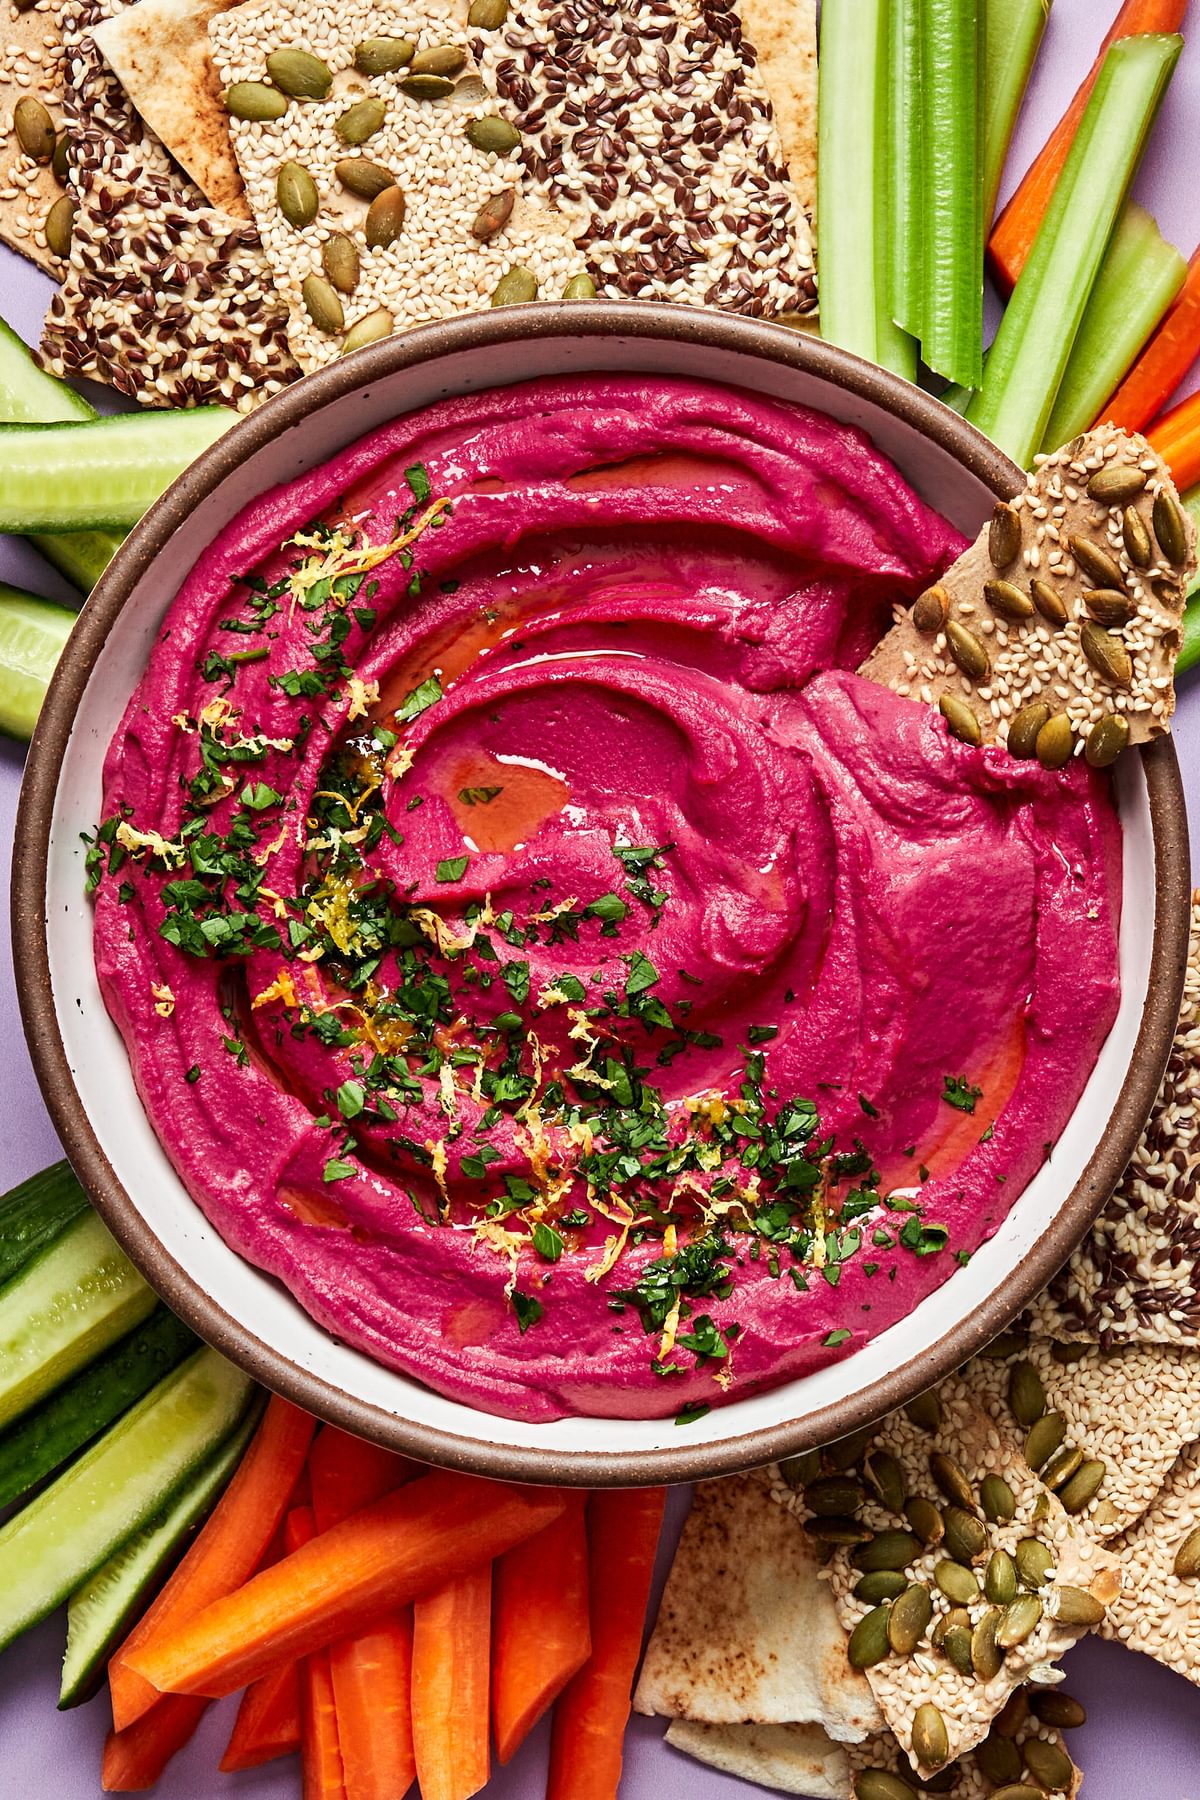 homemade beet hummus in a serving bowl surrounded by crackers, celery and carrots for dipping